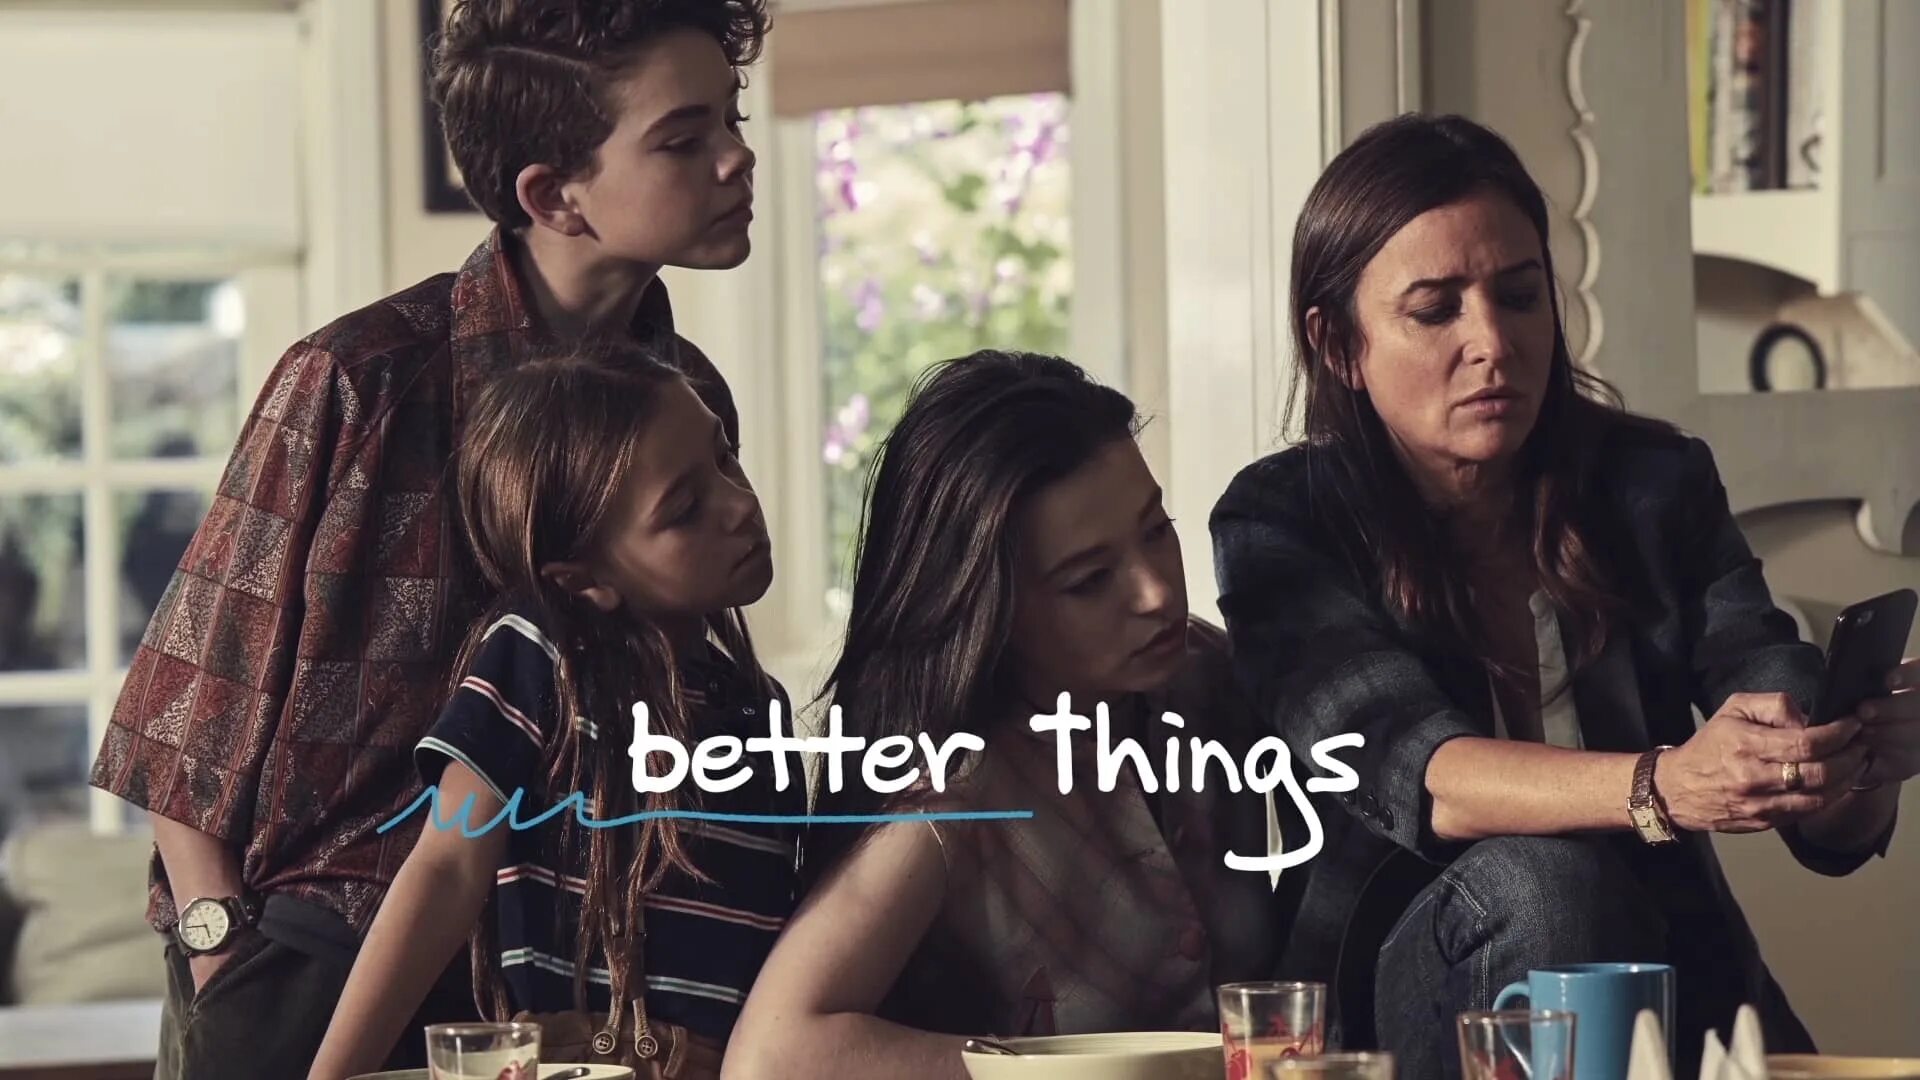 Found something good. Better things TV posters.